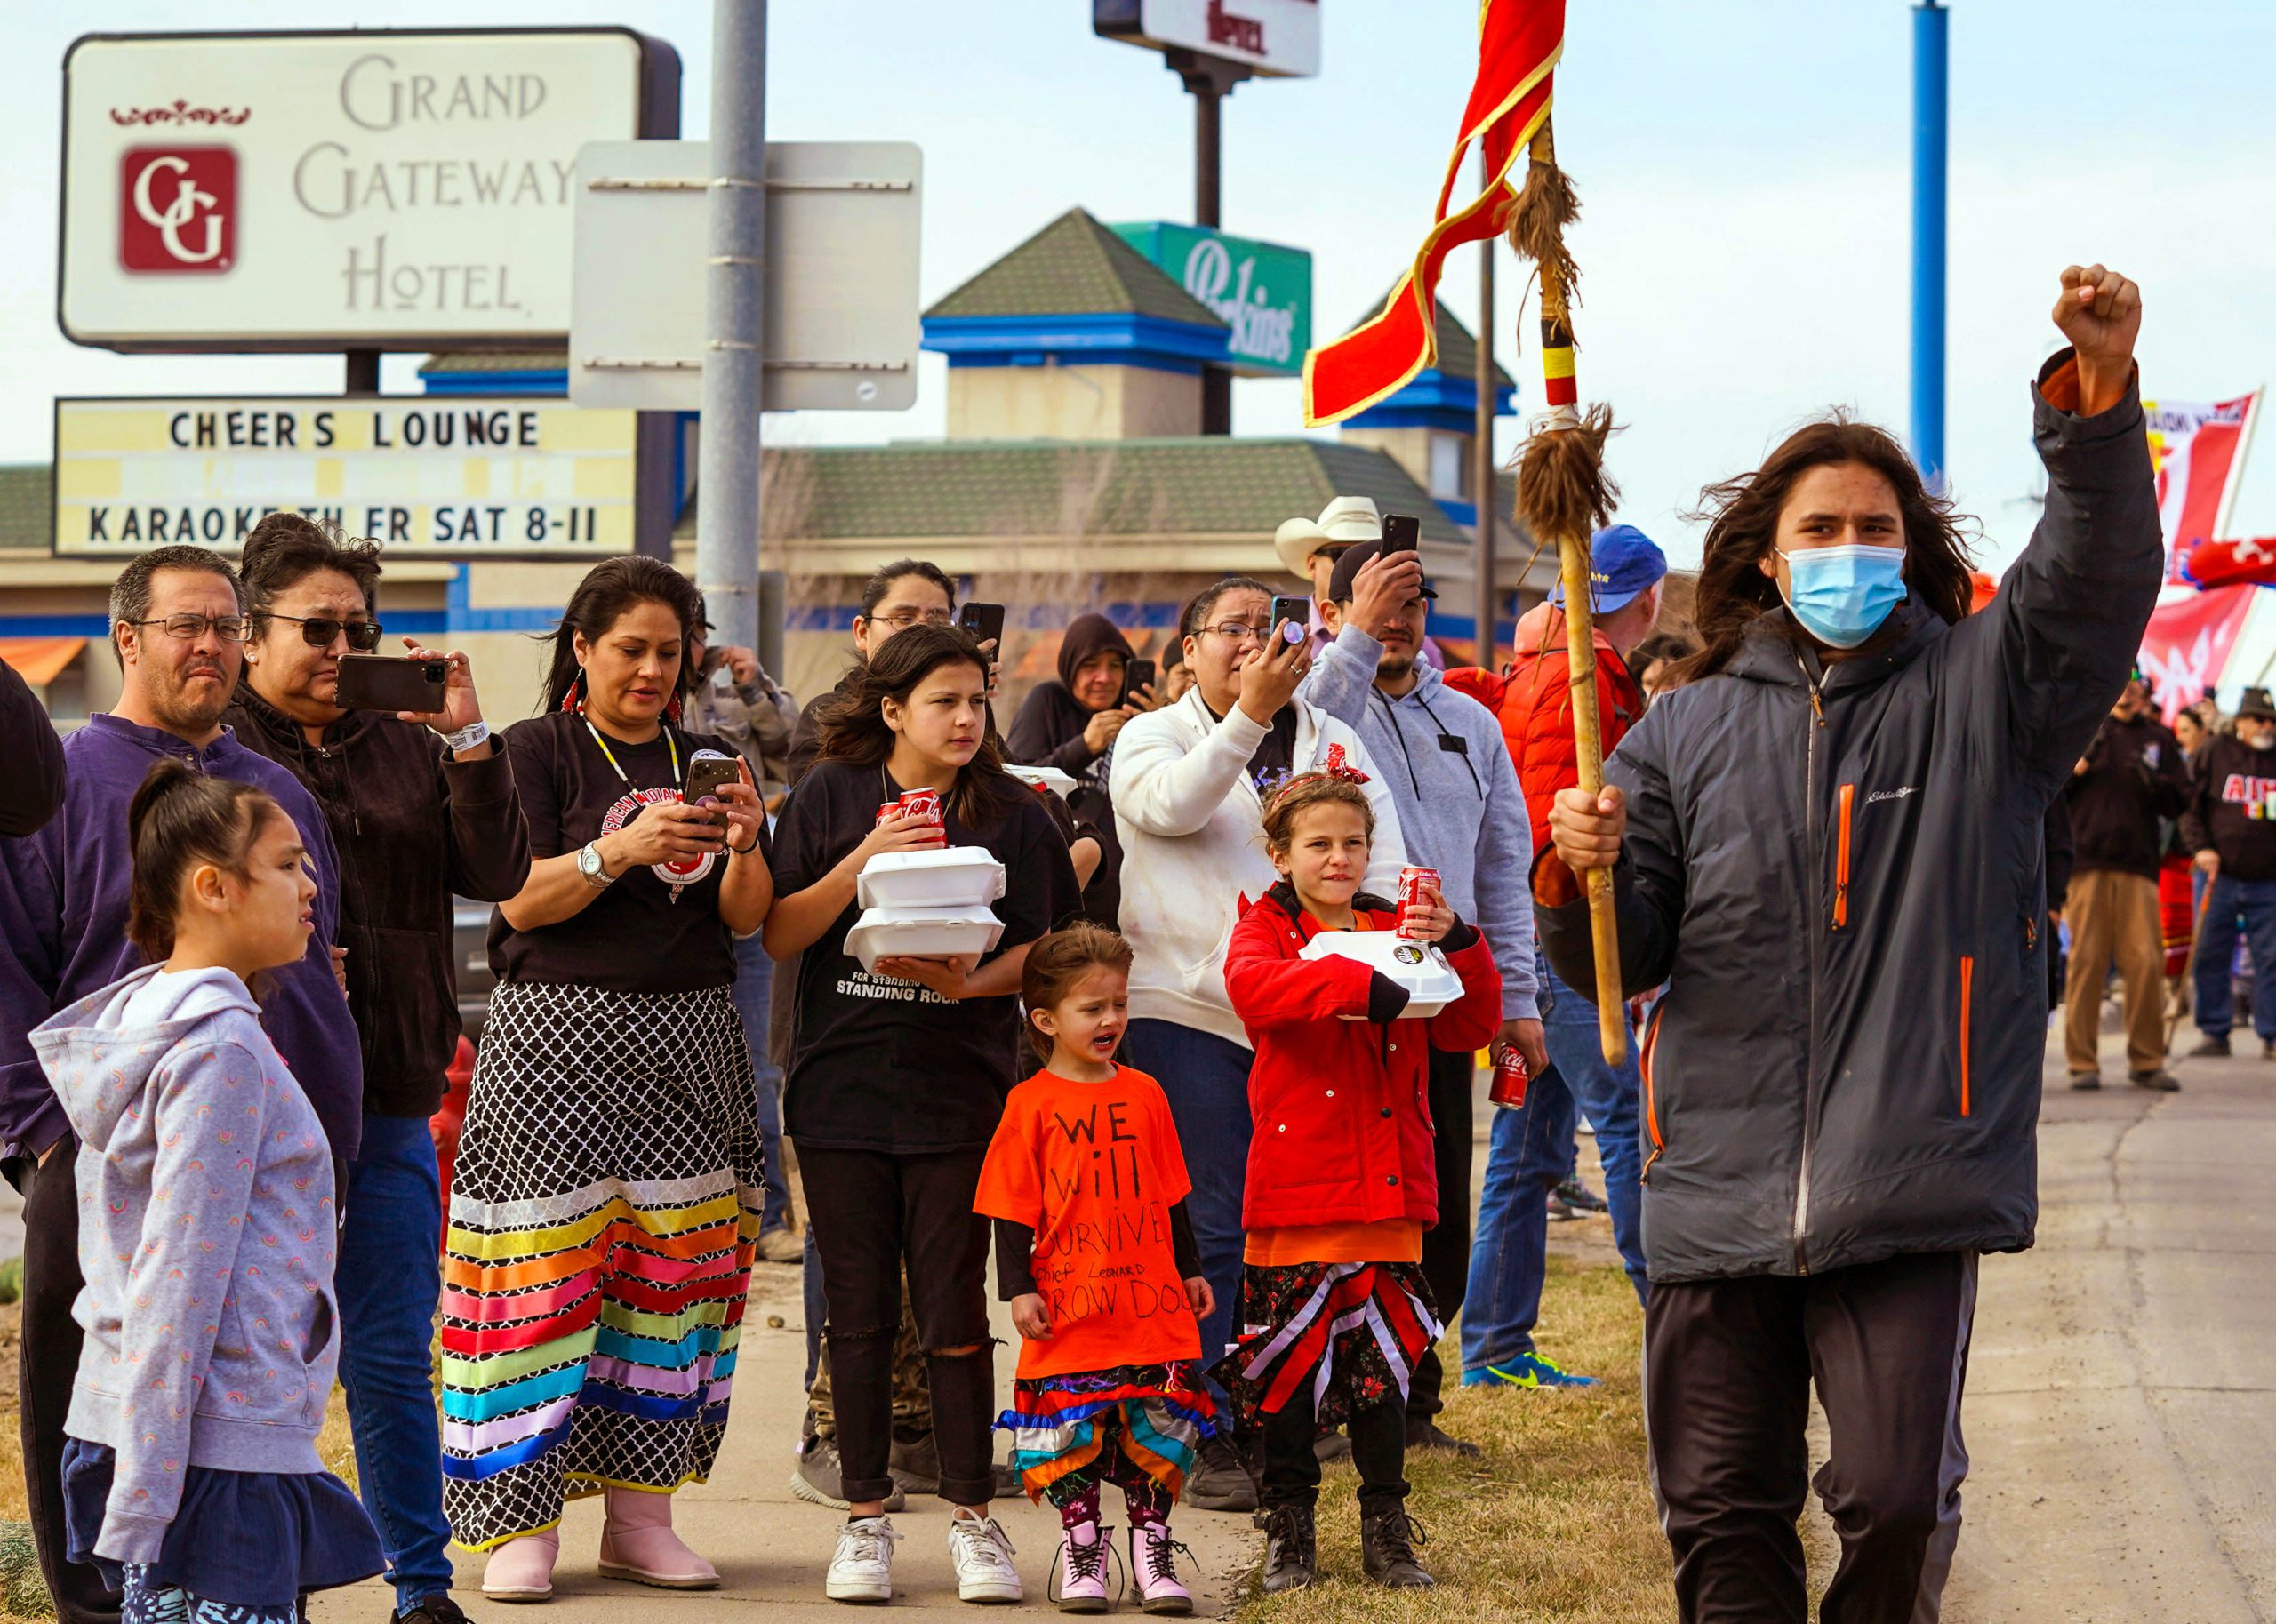 ‘Indians Allowed’: Sioux Nation rallies against racism and discrimination